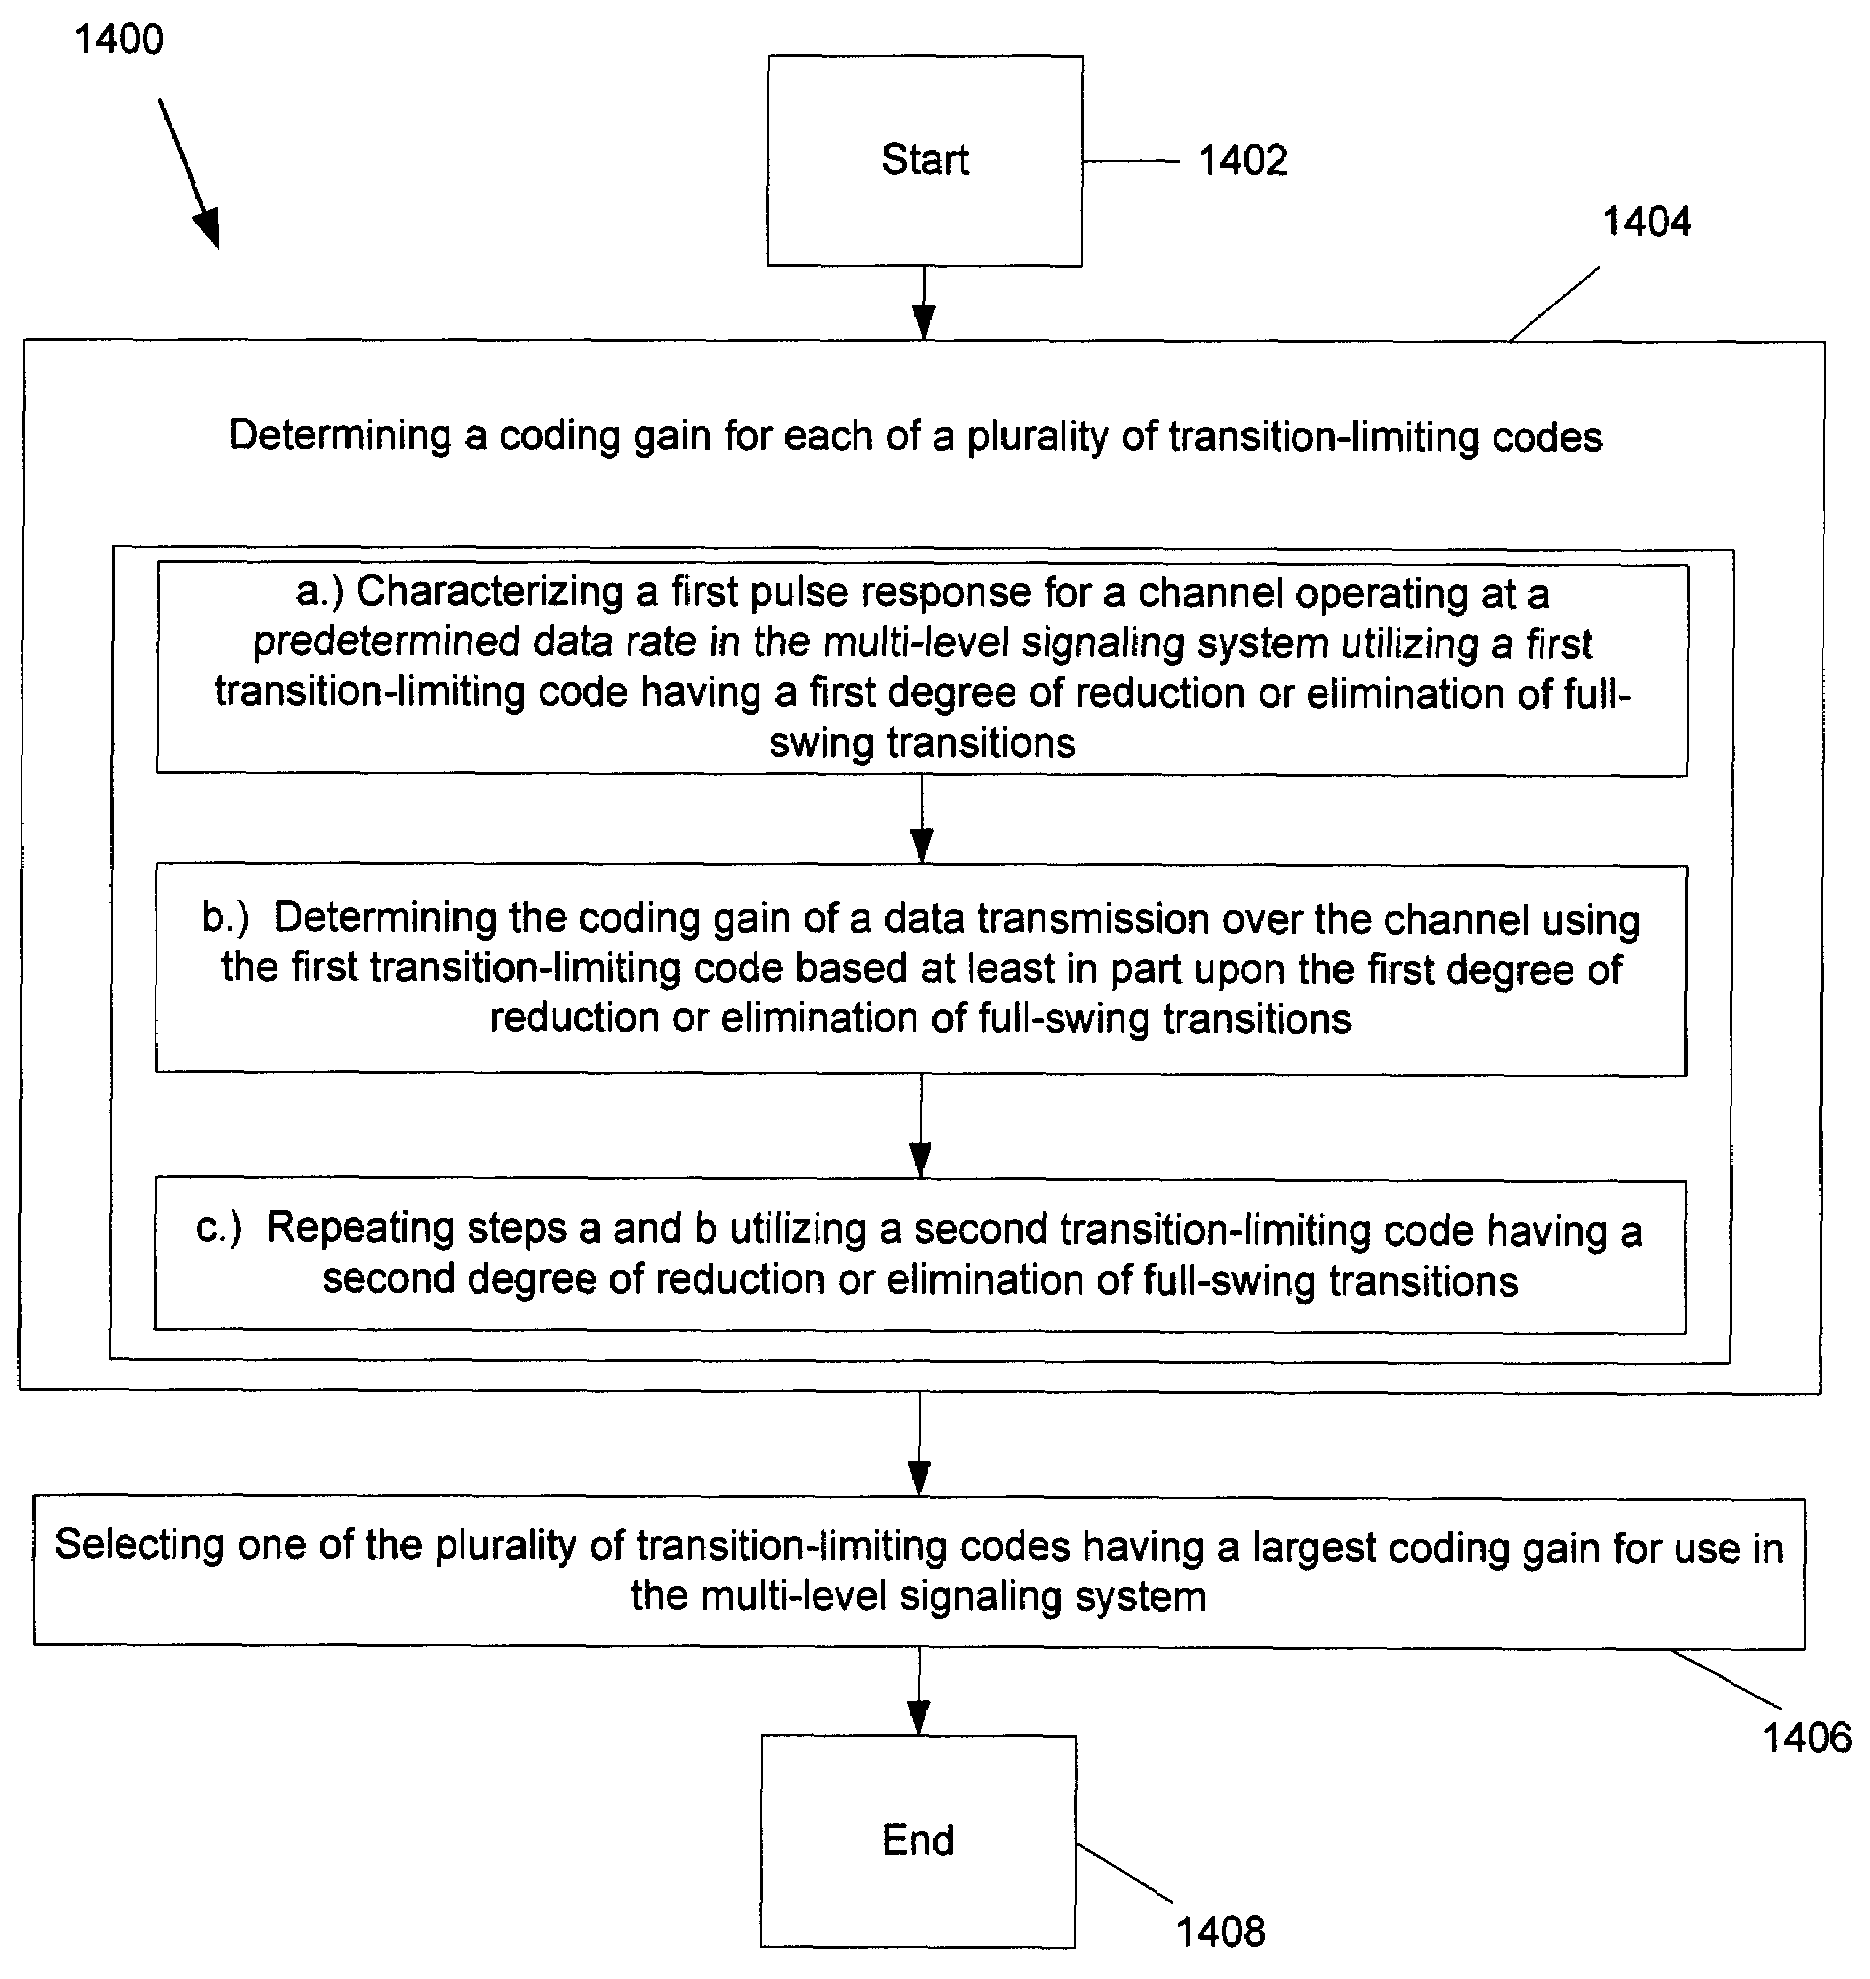 Technique for determining an optimal transition-limiting code for use in a multi-level signaling system